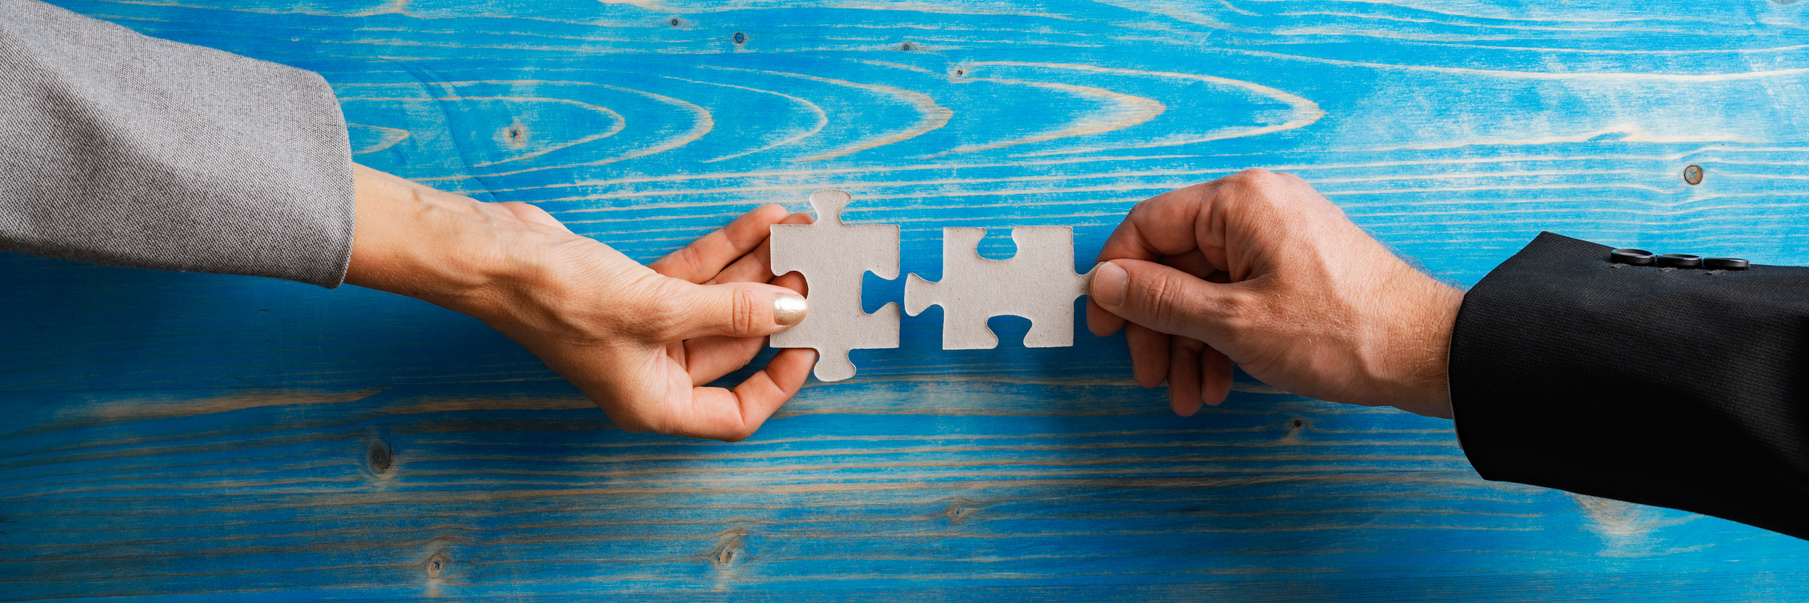 Hands Holding Puzzle Pieces That Fit Together 